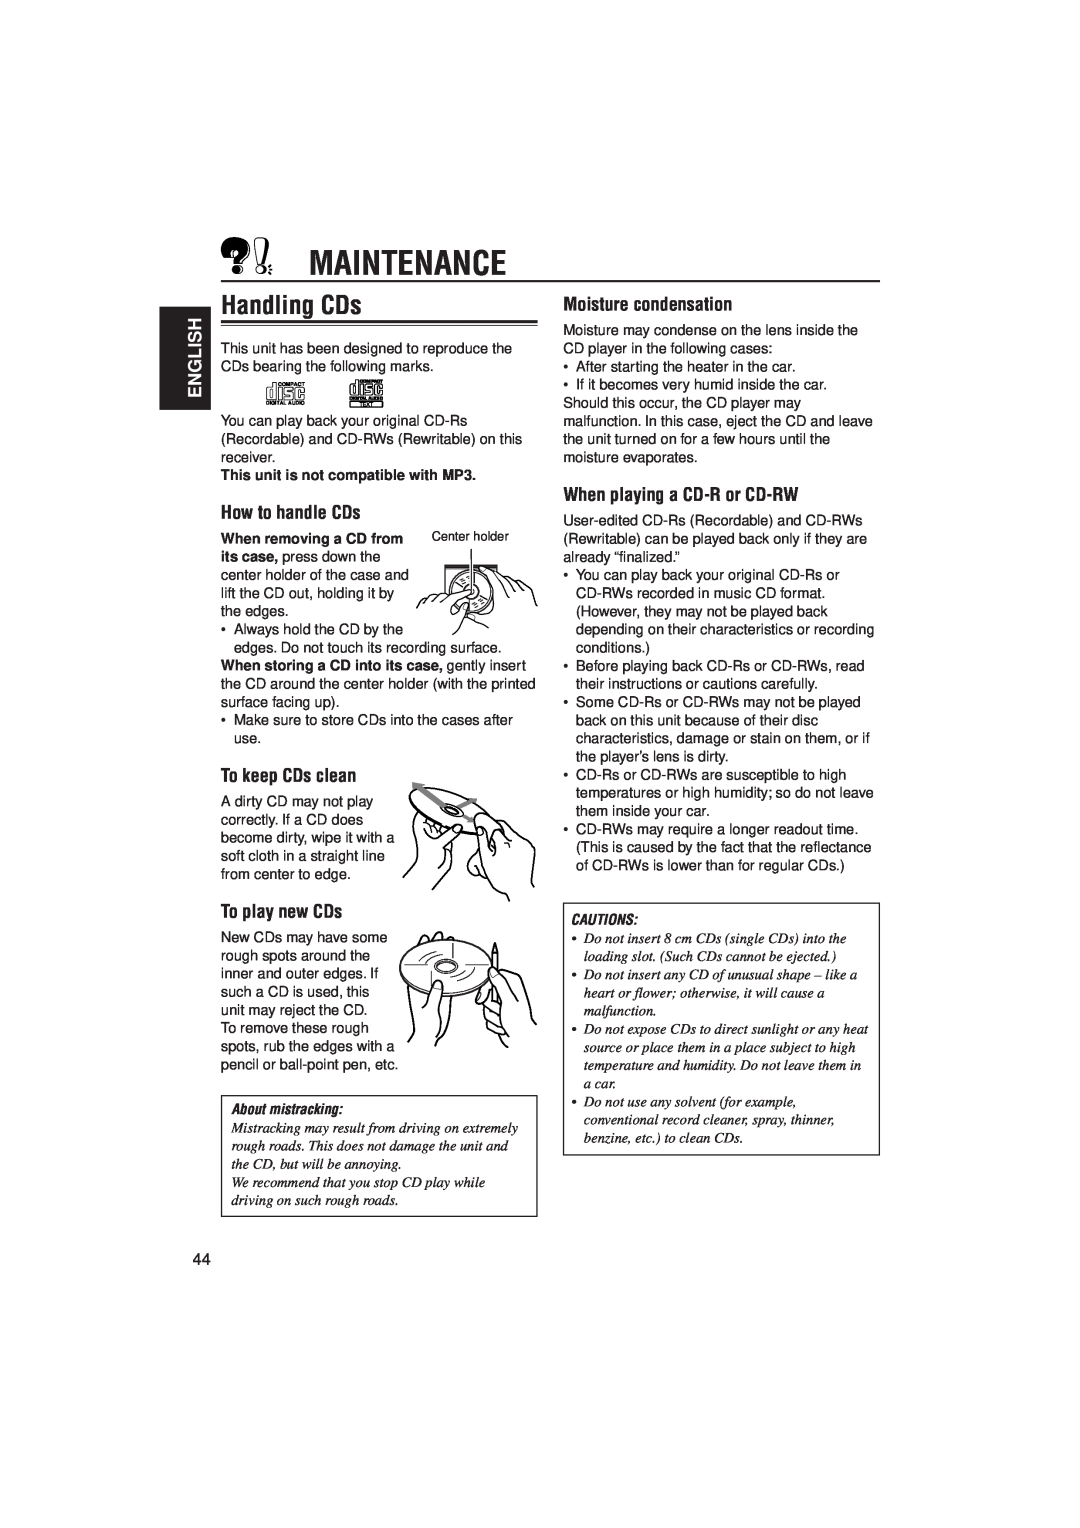 JVC PIM171200 Maintenance, Handling CDs, English, Moisture condensation, How to handle CDs, To keep CDs clean, Cautions 